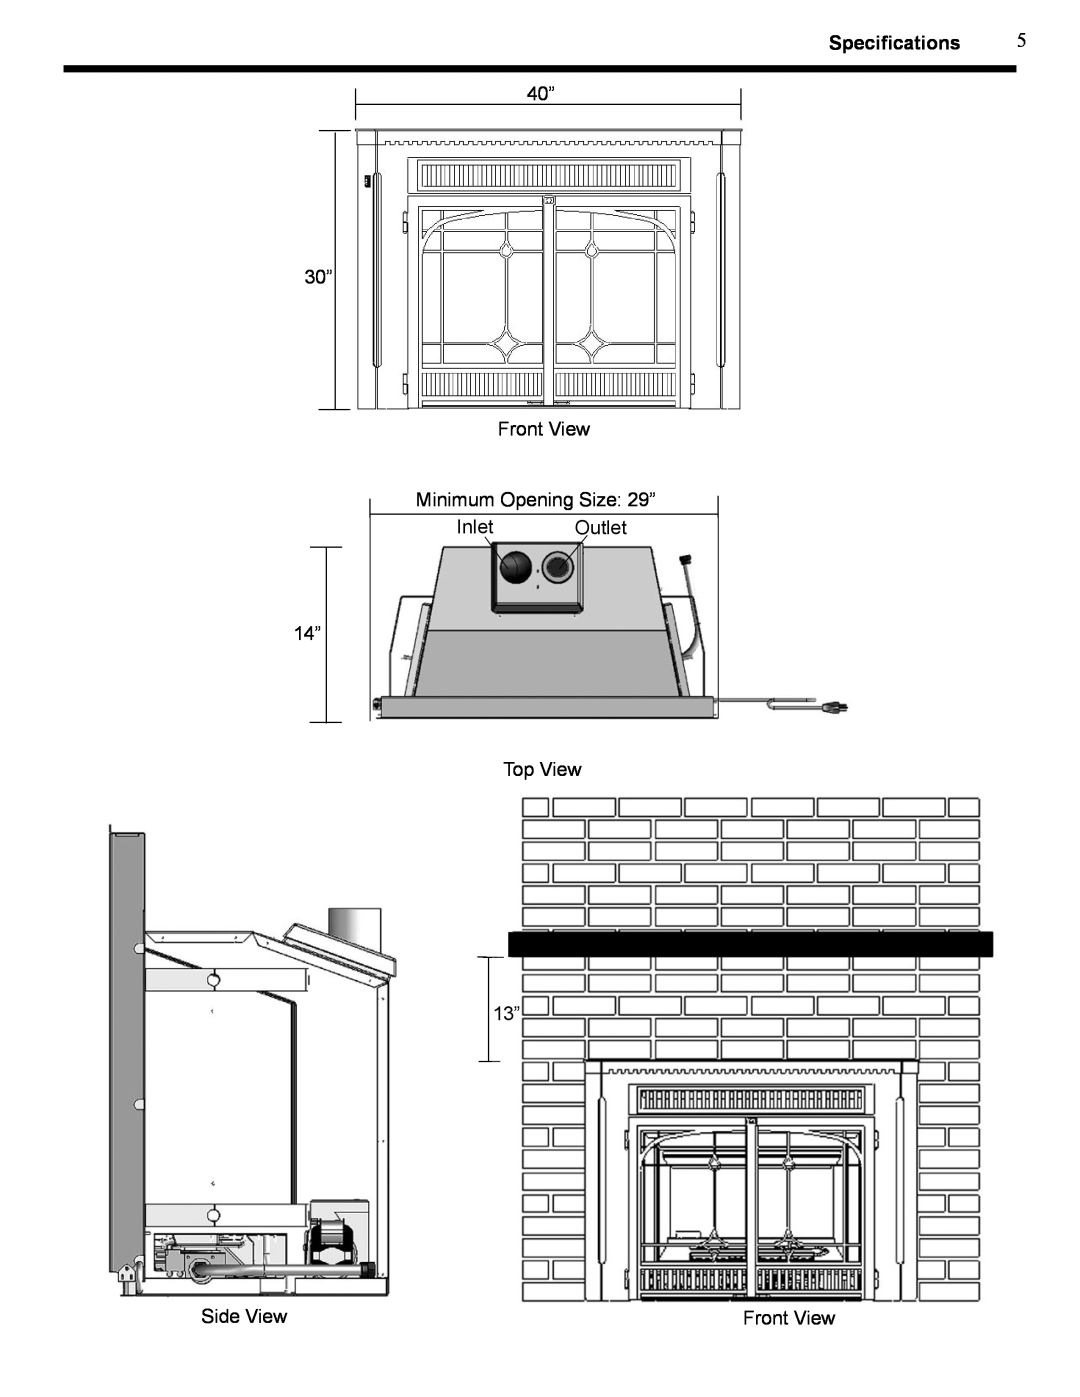 Harman Stove Company XL Speciﬁcations, 30” 14”, 40” Front View Minimum Opening Size 29”, Inlet Outlet Top View 13” 